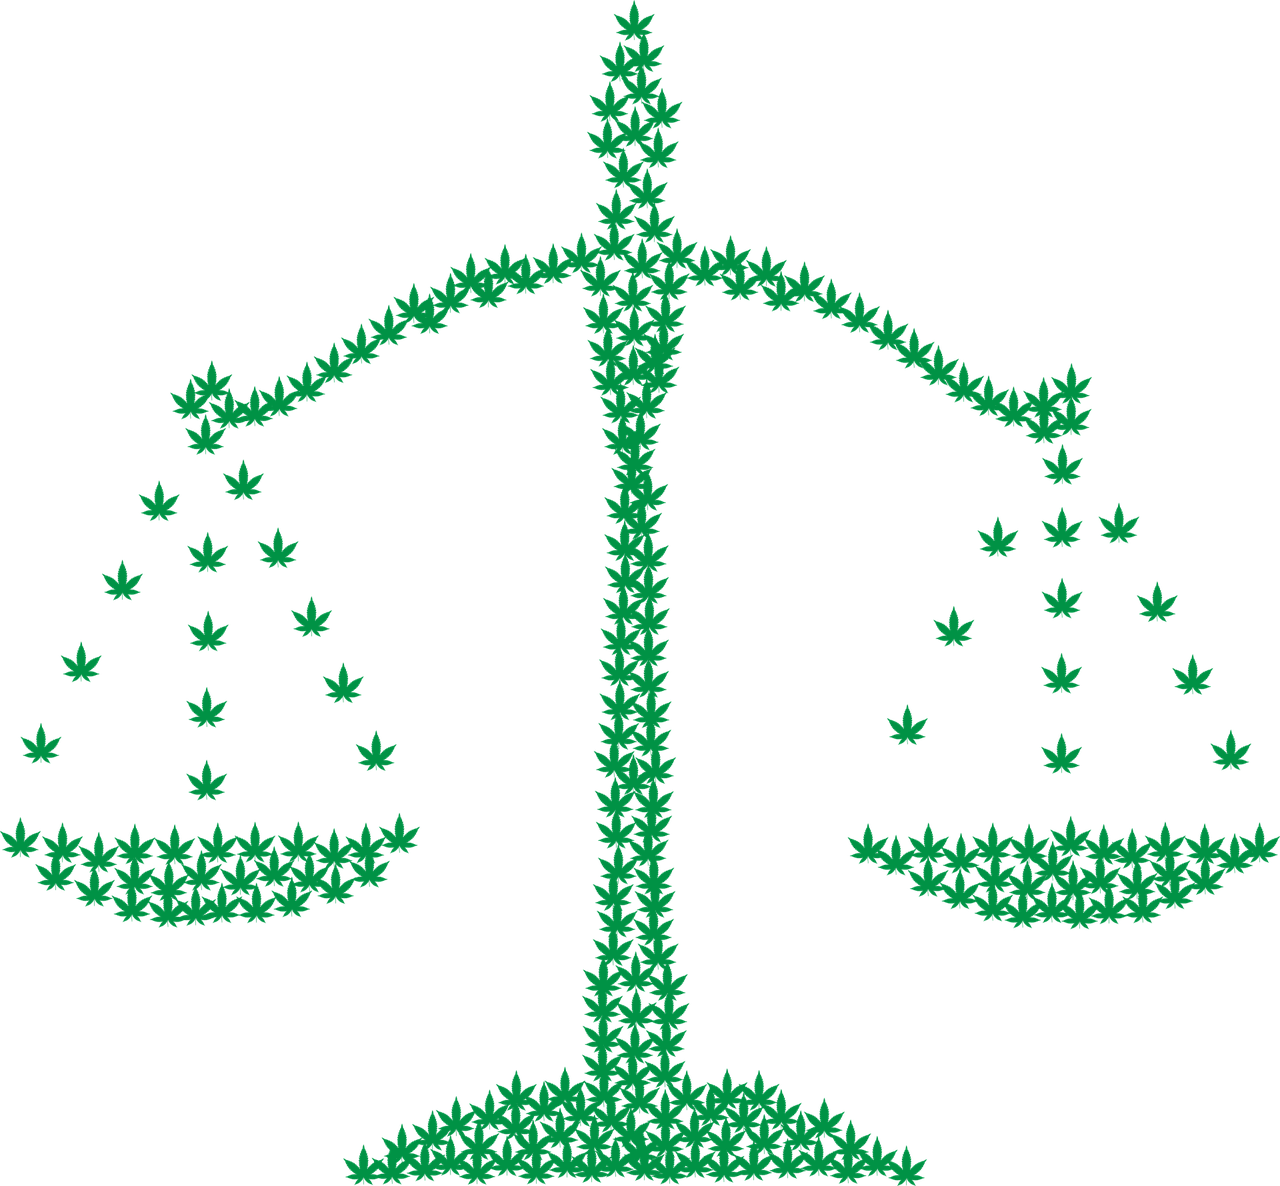 Delta 8 and Delta 9 stay within the confines of the law being derived from hemp.